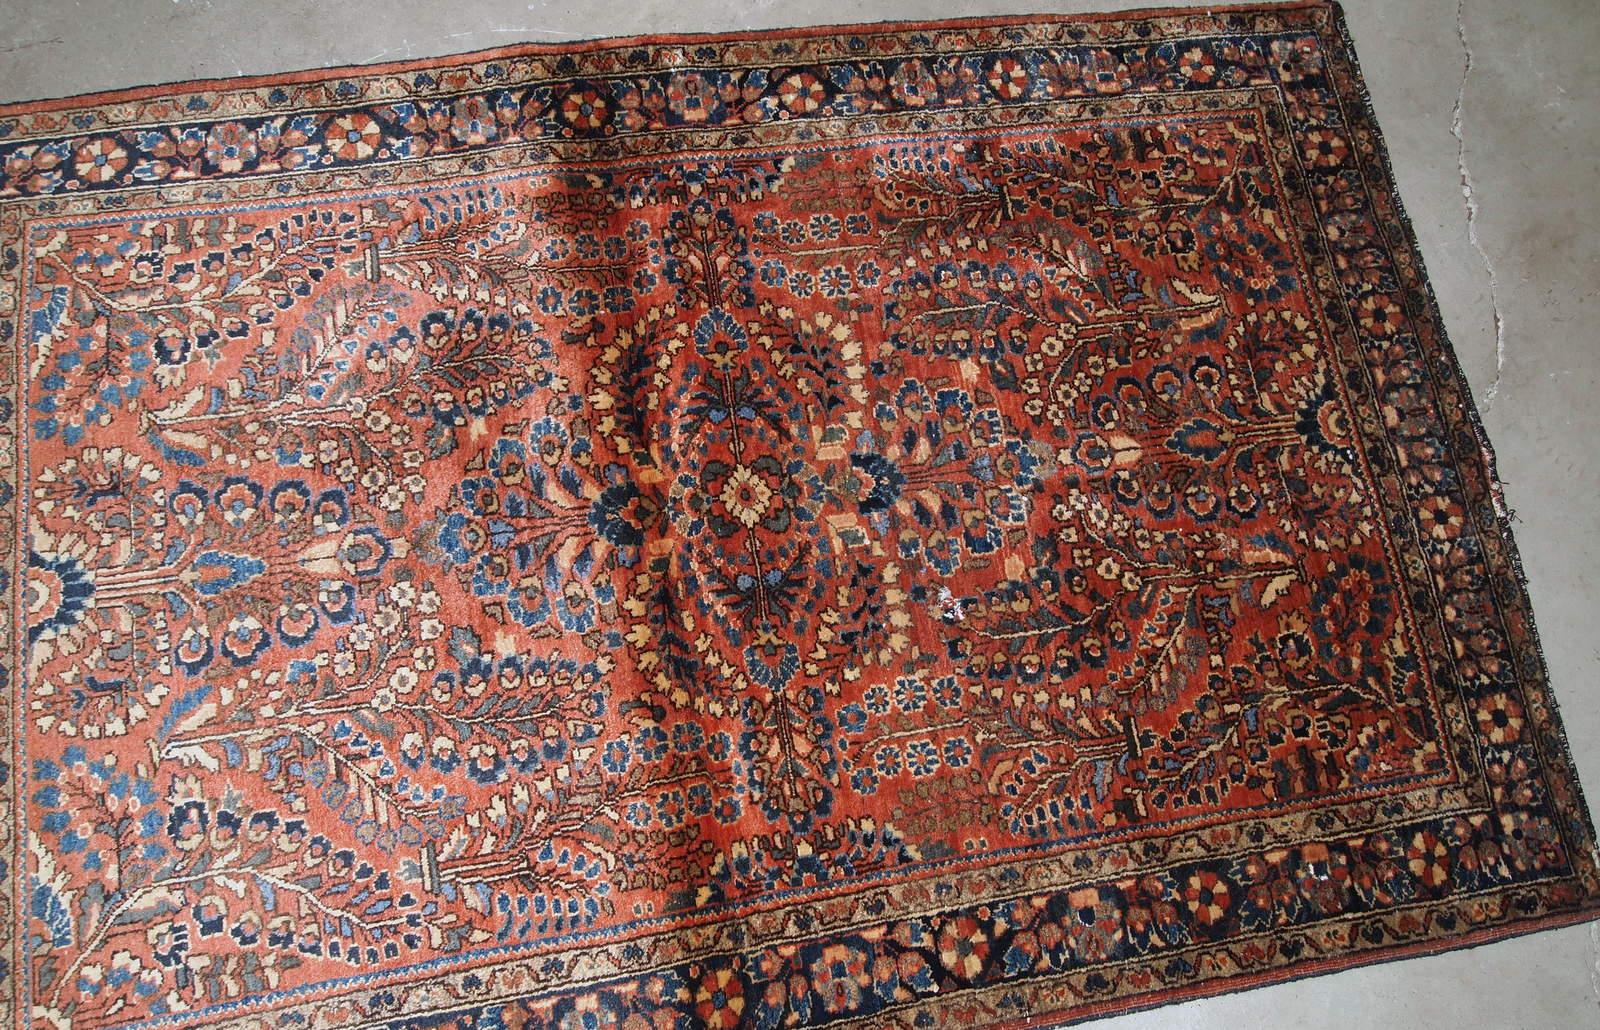 Handmade antique Sarouk style rug in original good condition. The rug is from the beginning of 20th century made in red wool.

- Condition: original good,

- circa 1920s,

- Size: 3.4' x 5.5' (103cm x 167cm),

- Material: wool,

- Country